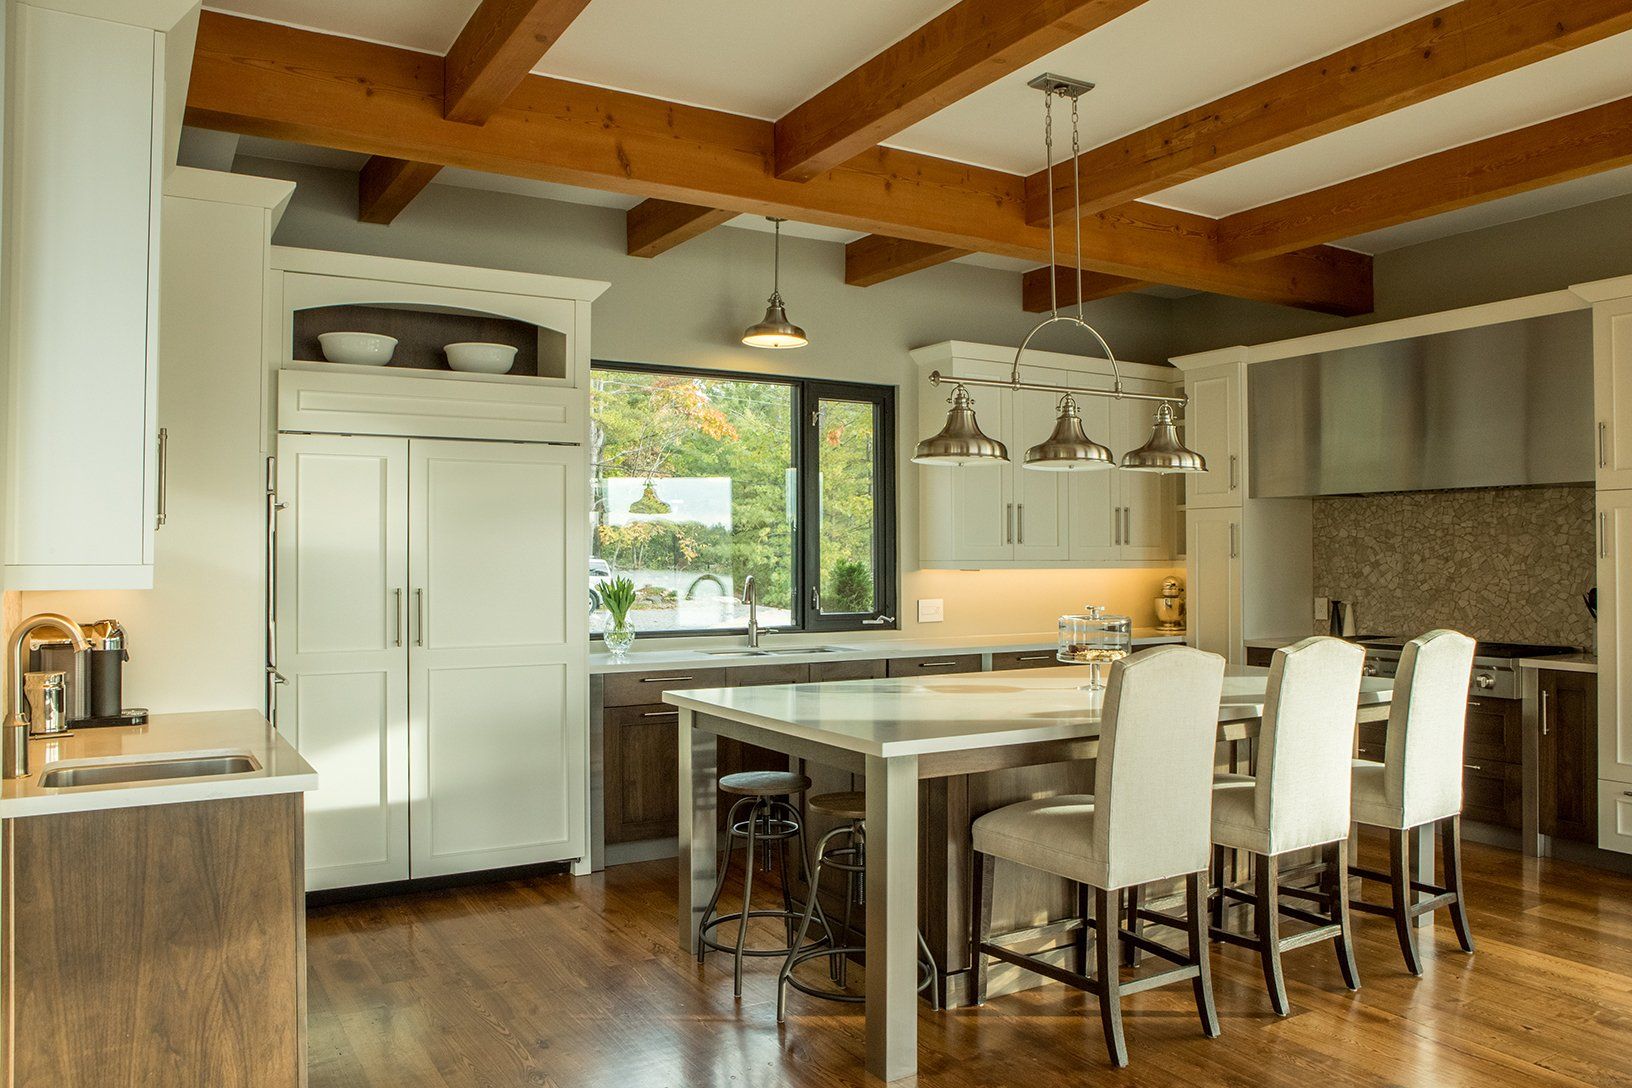 In this CedarCoast home a bright, expansive kitchen features a vaulted ceiling with ample seating at the island.